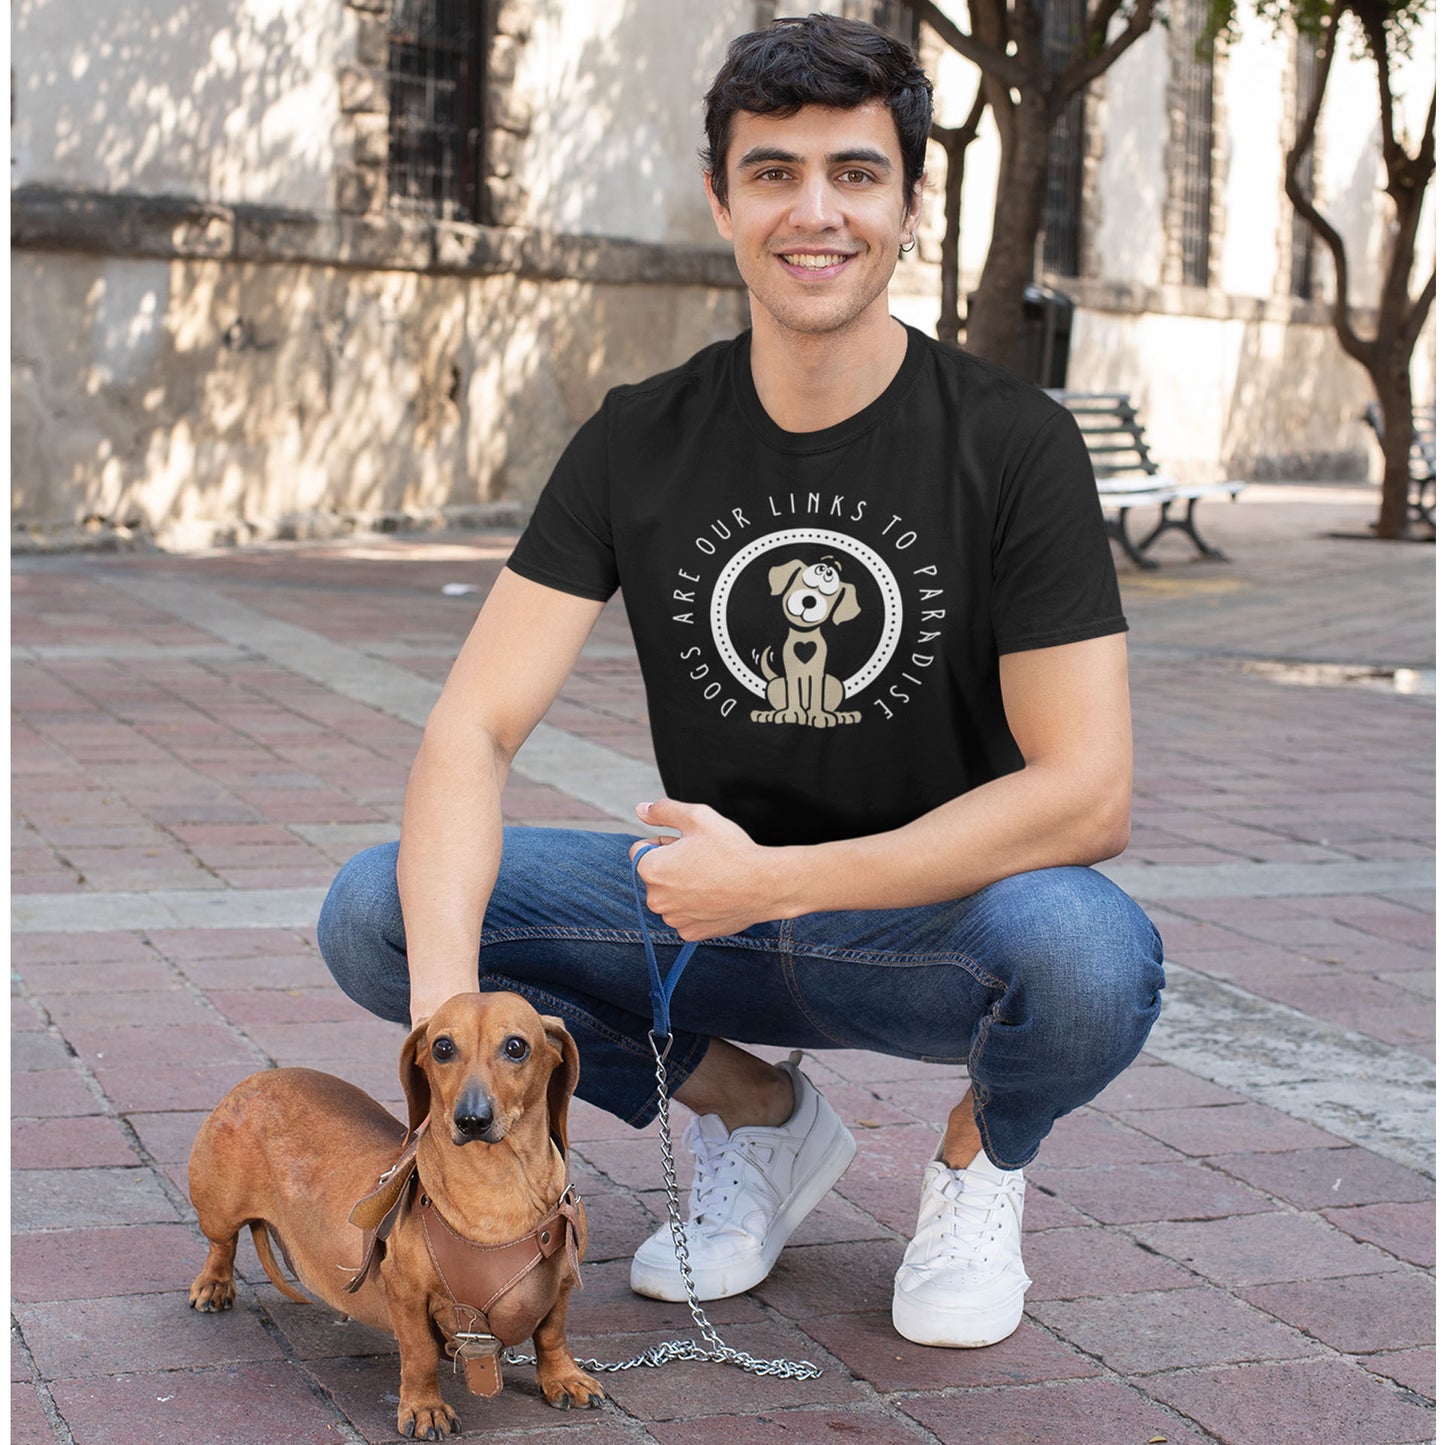  A man, donning a black 'Dogs Pure Love, Dogs are Paradise' unisex tee, crouches down to affectionately pat his Dachshund on a leash while on a tiled footpath.